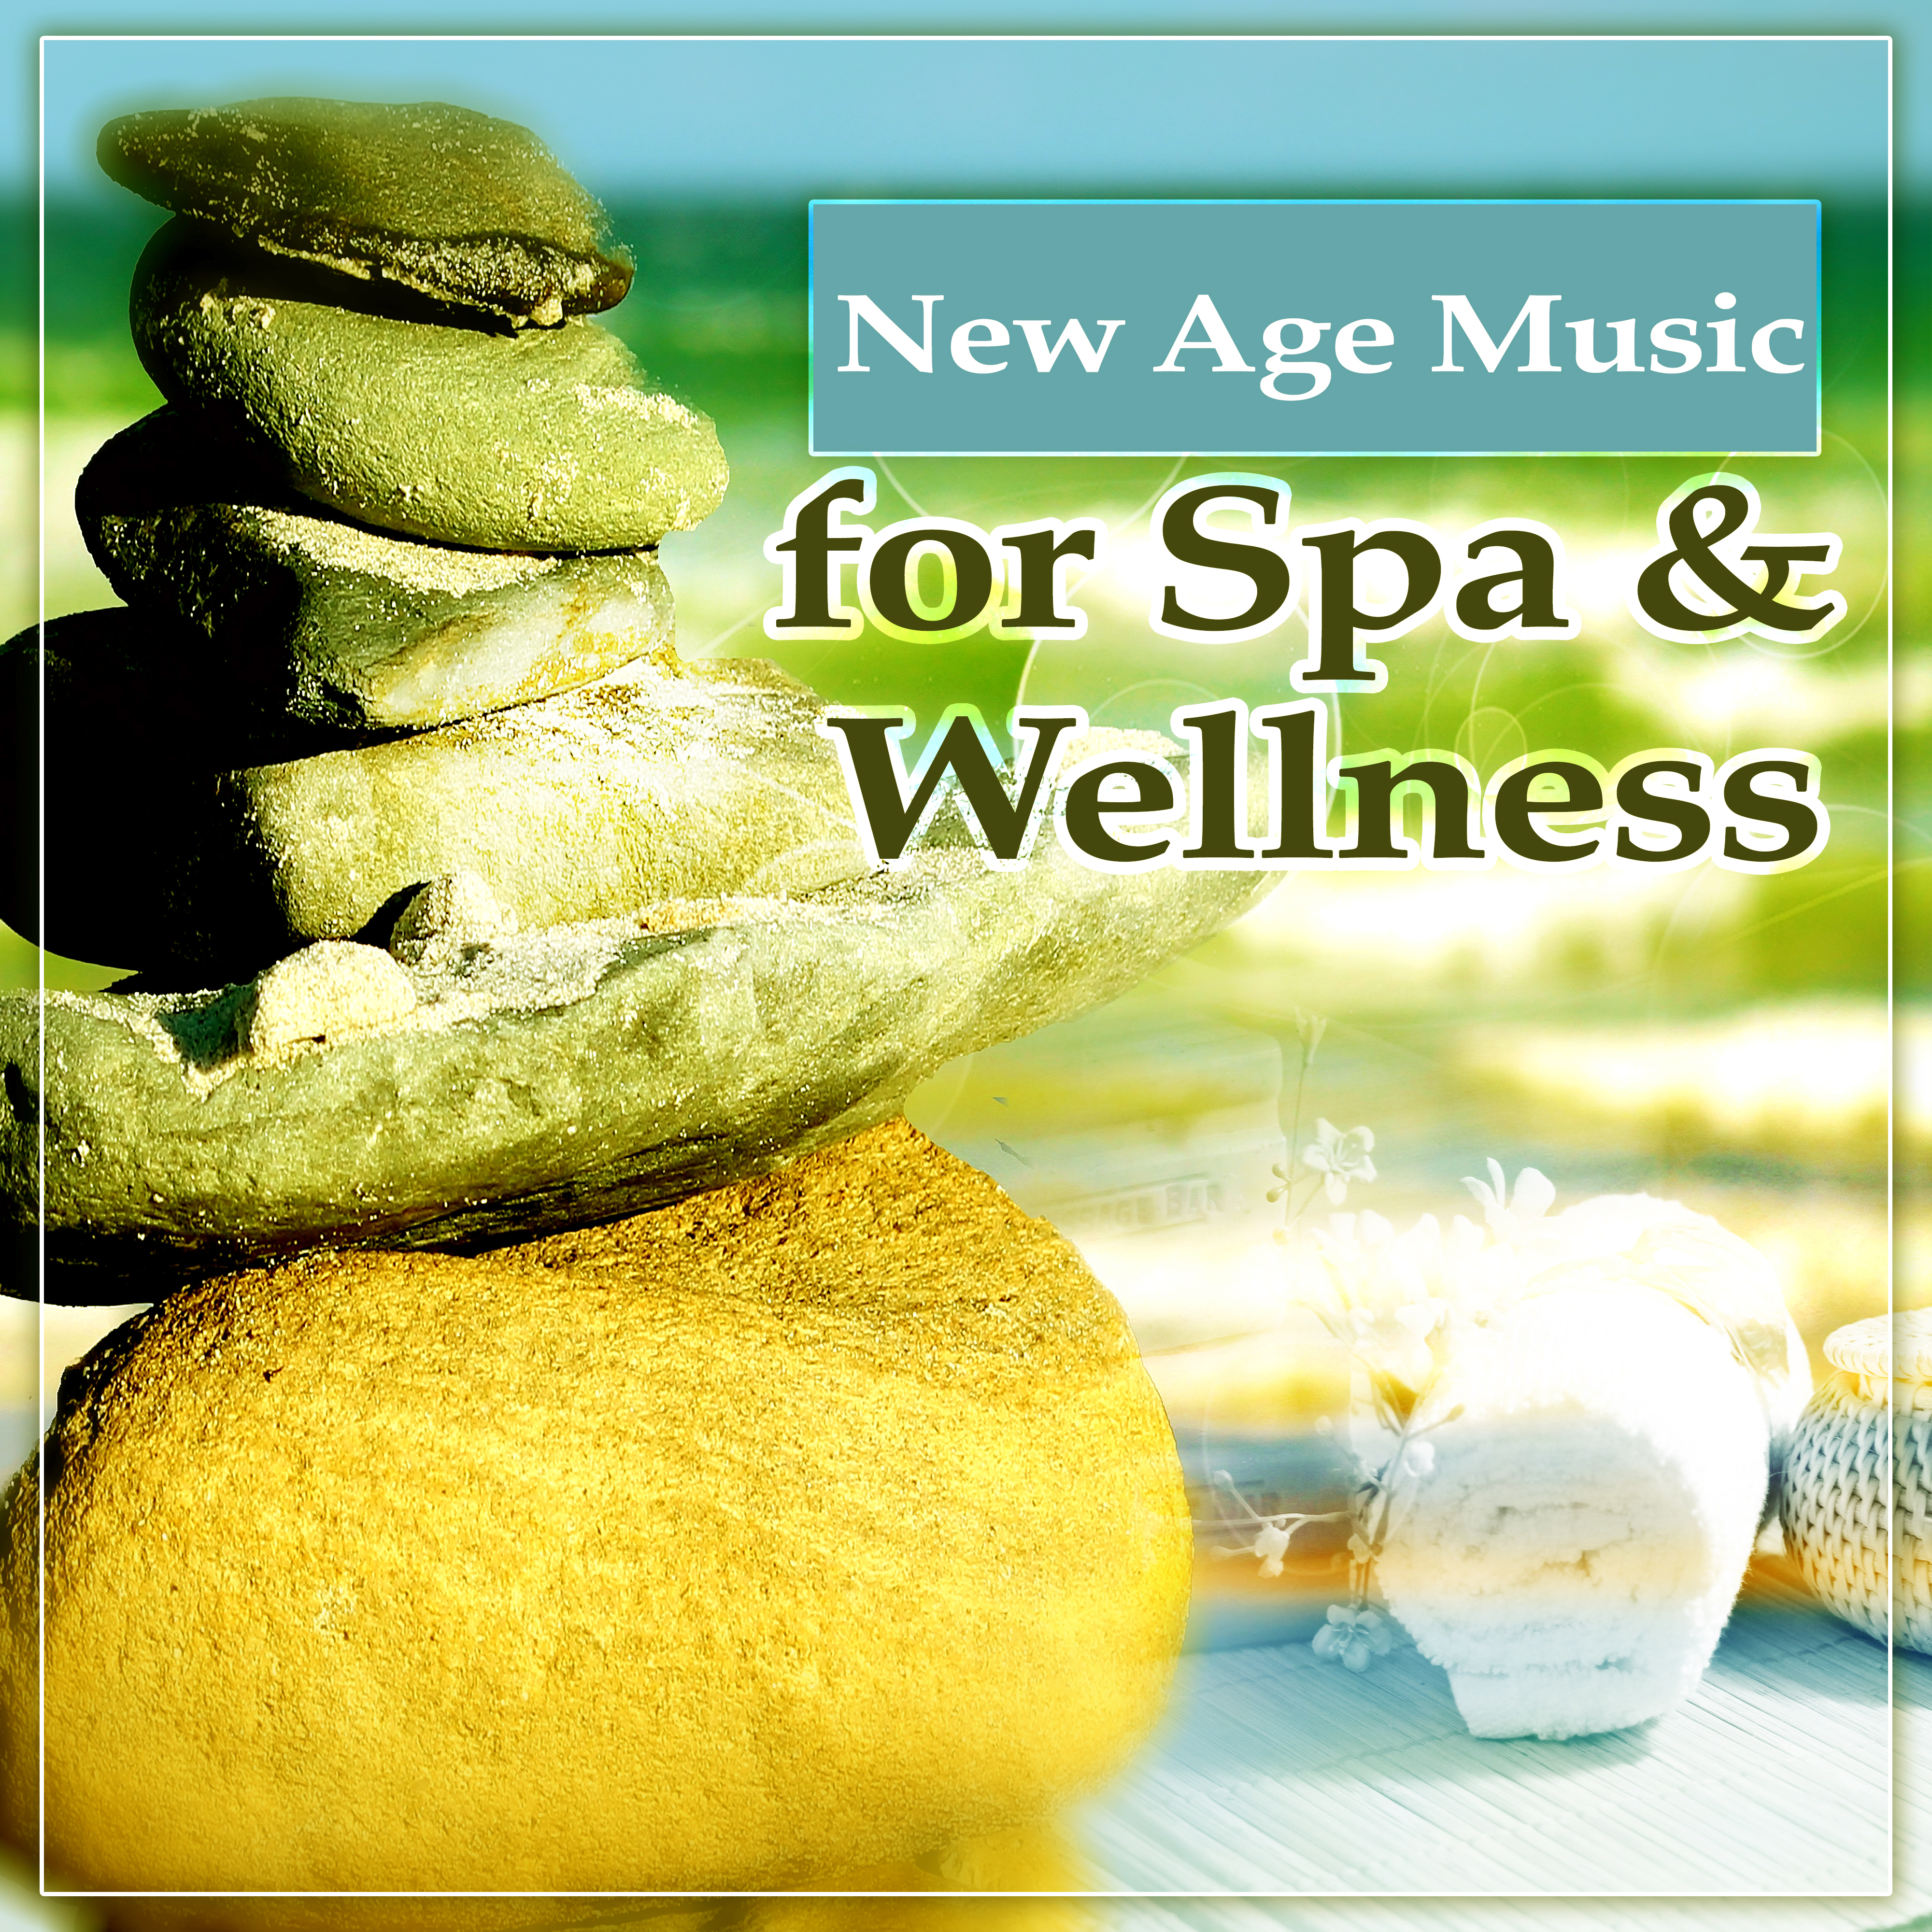 New Age Music for Spa  Wellness  Calming Sounds, Relaxing Music, Nature Waves, Chill Yourself